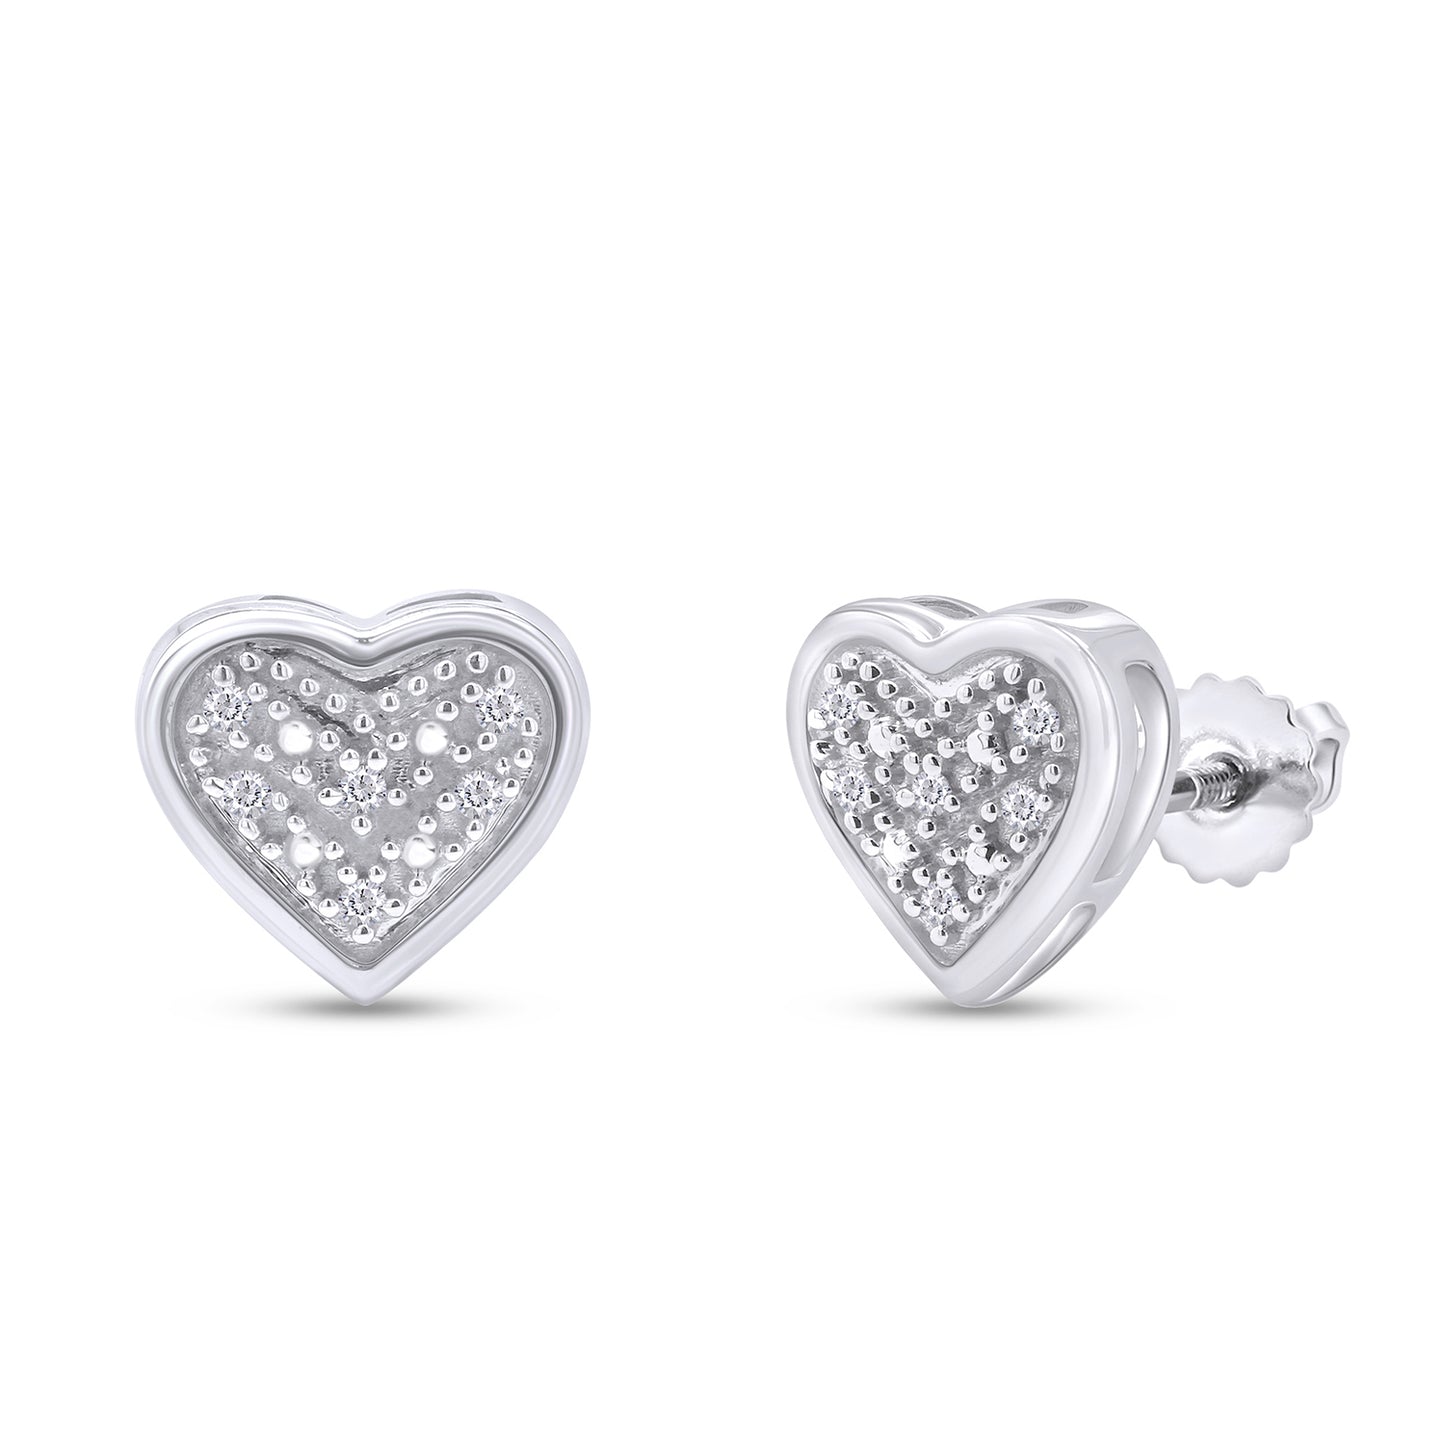 1/20 Carat Round Cut Natural Diamond Heart Stud Earrings in 925 Sterling Silver (0.05 Cttw)